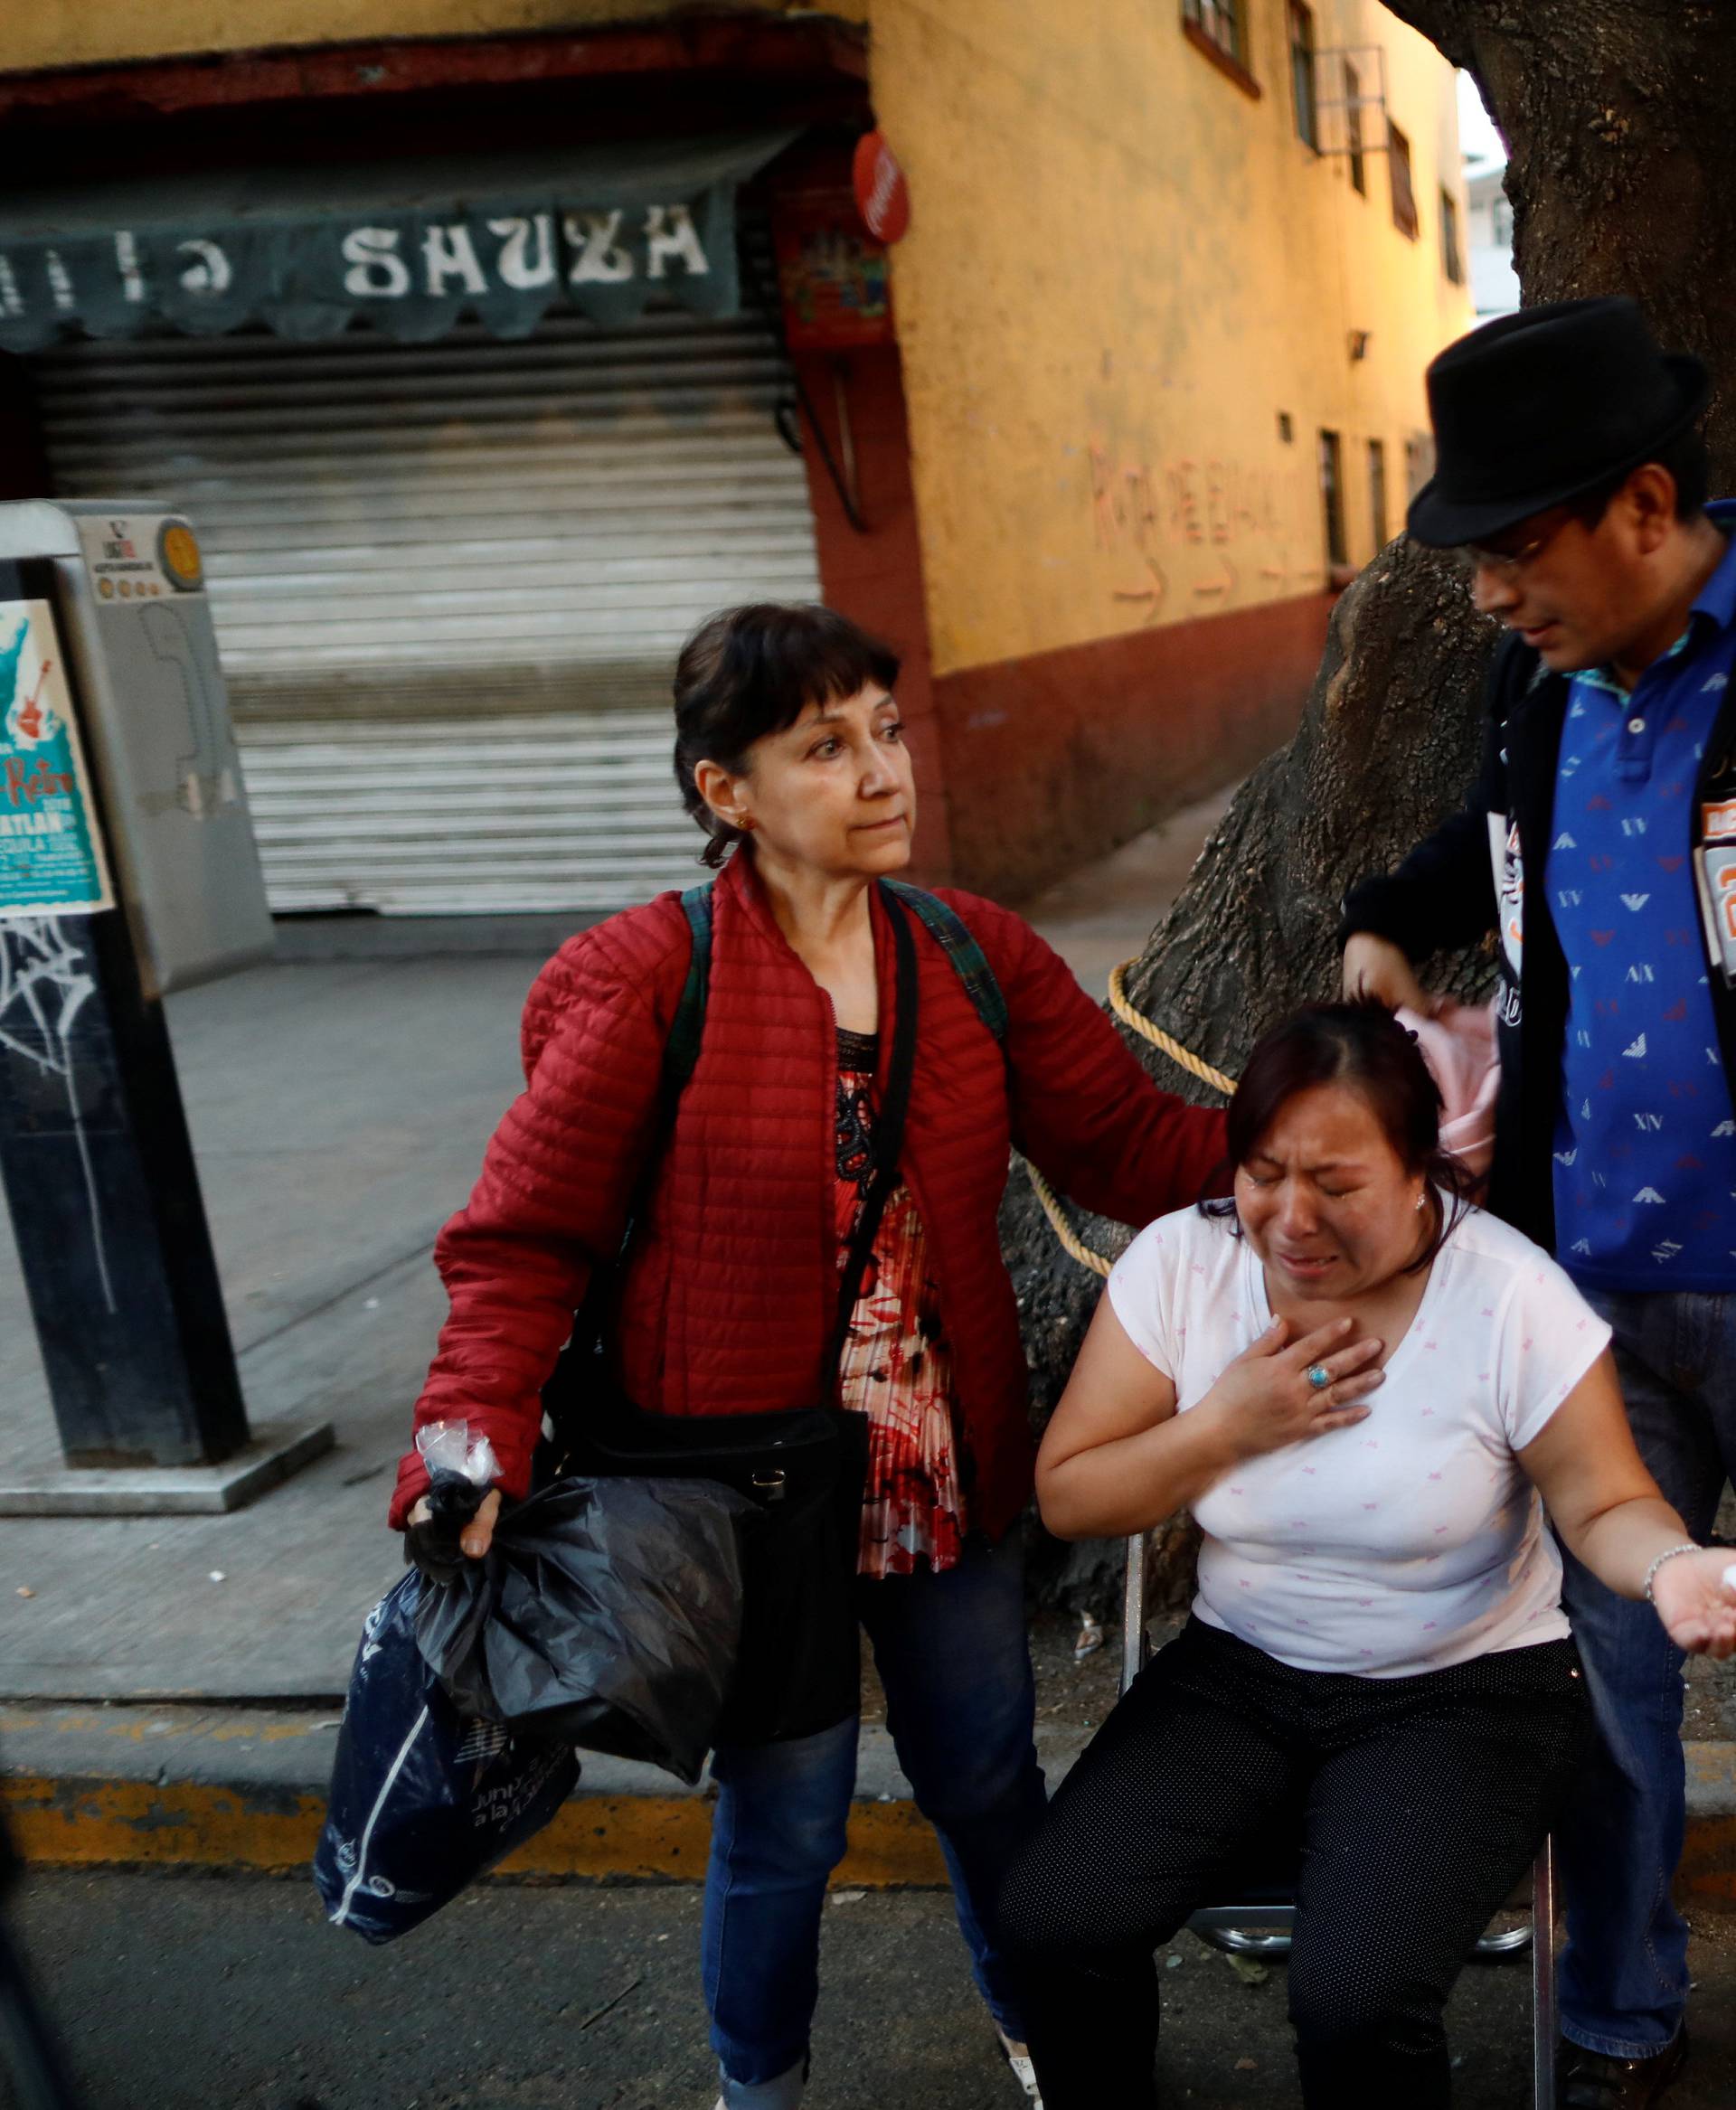 People react after an earthquake shook buildings in Mexico City